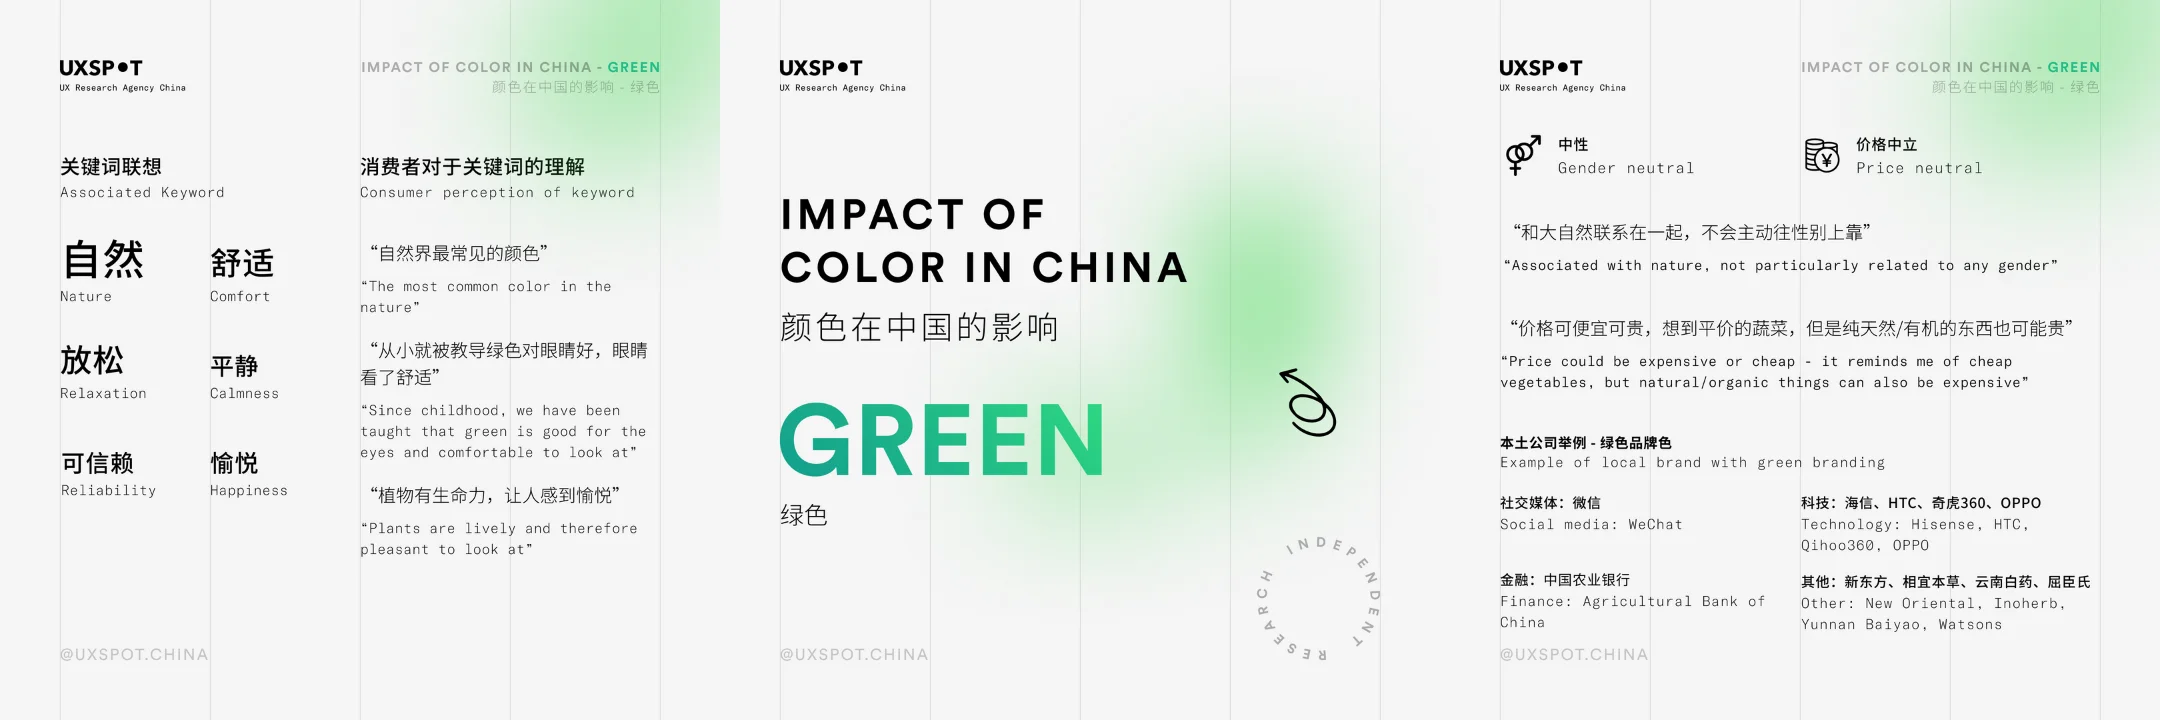 color psychology China color green data summary